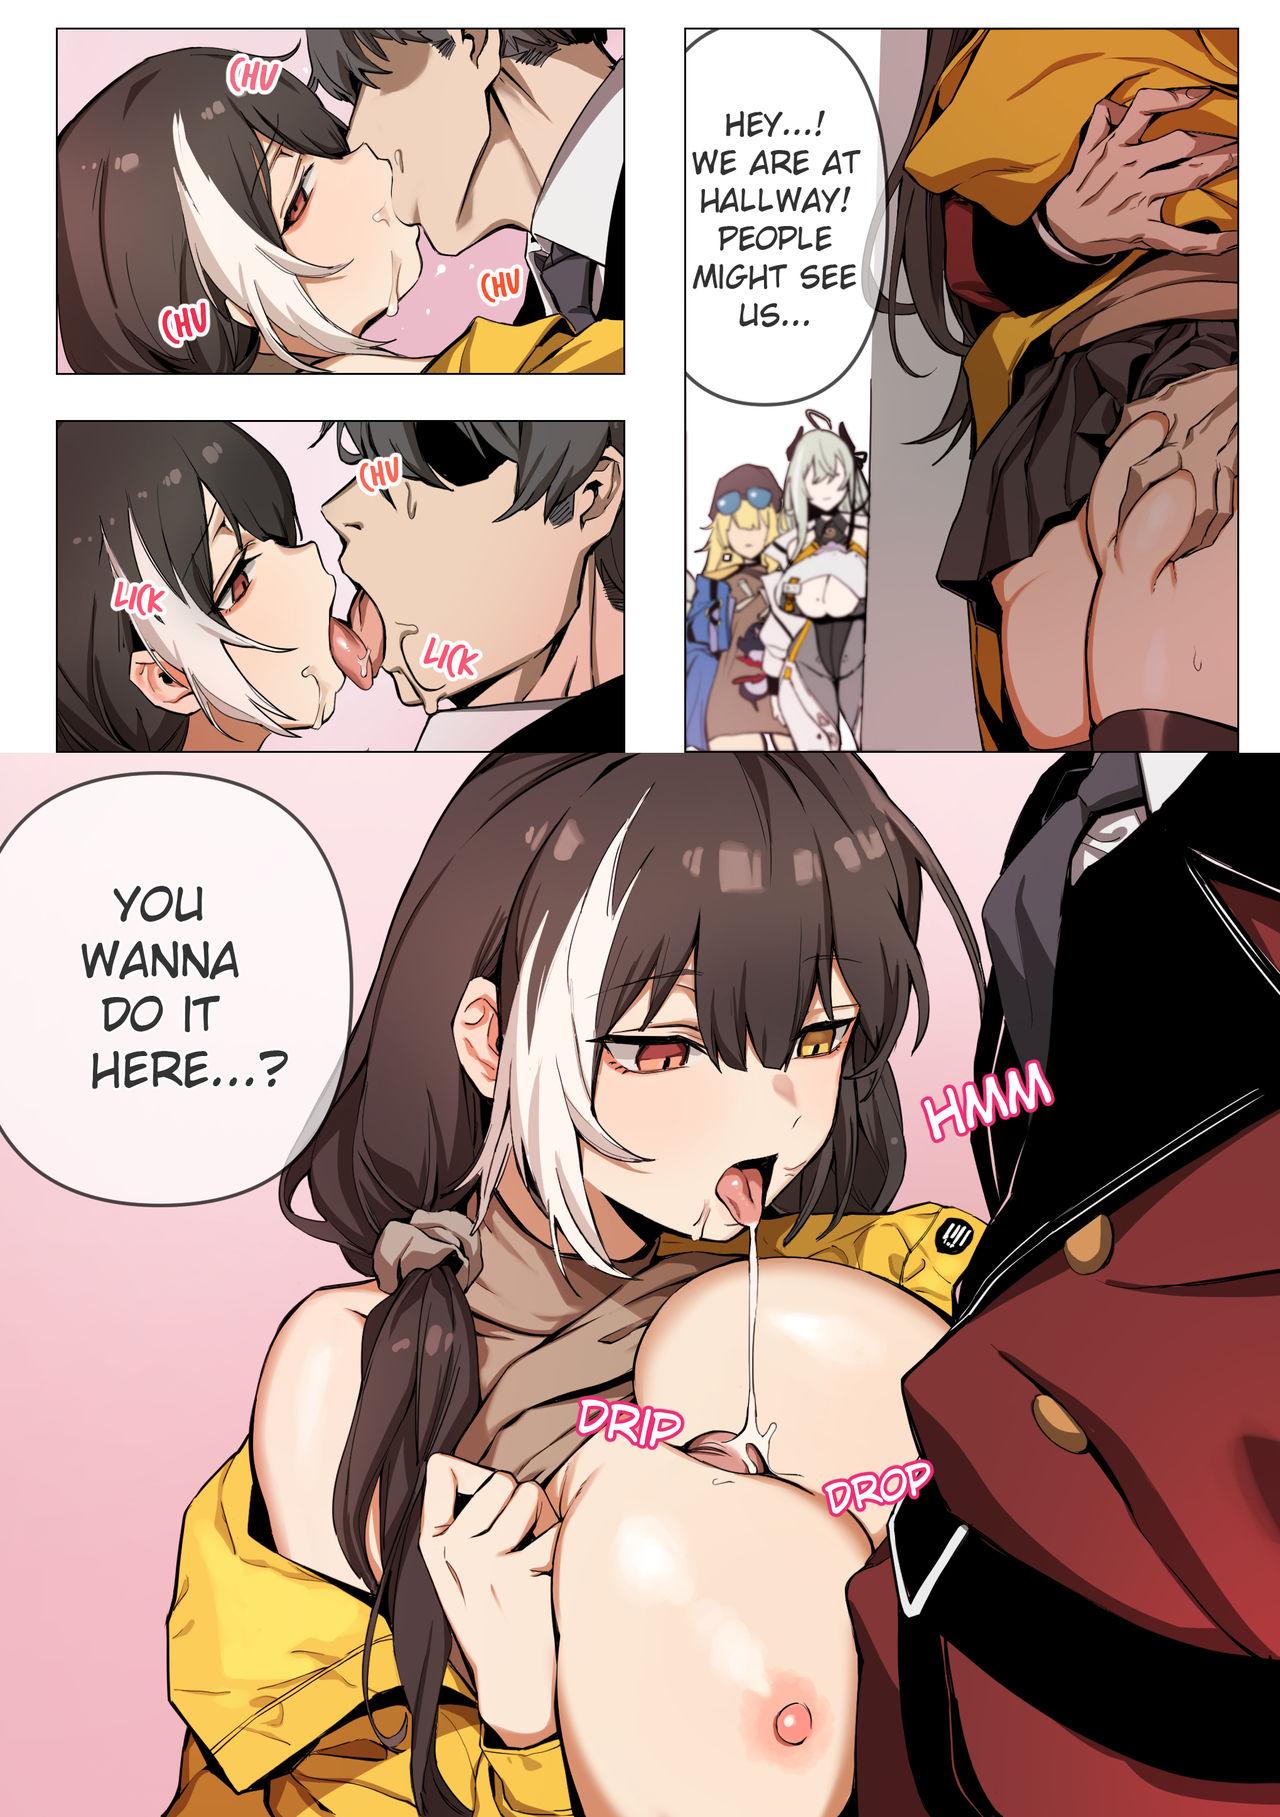 Wet Pussy ro635 - Girls frontline Uncensored - Page 3